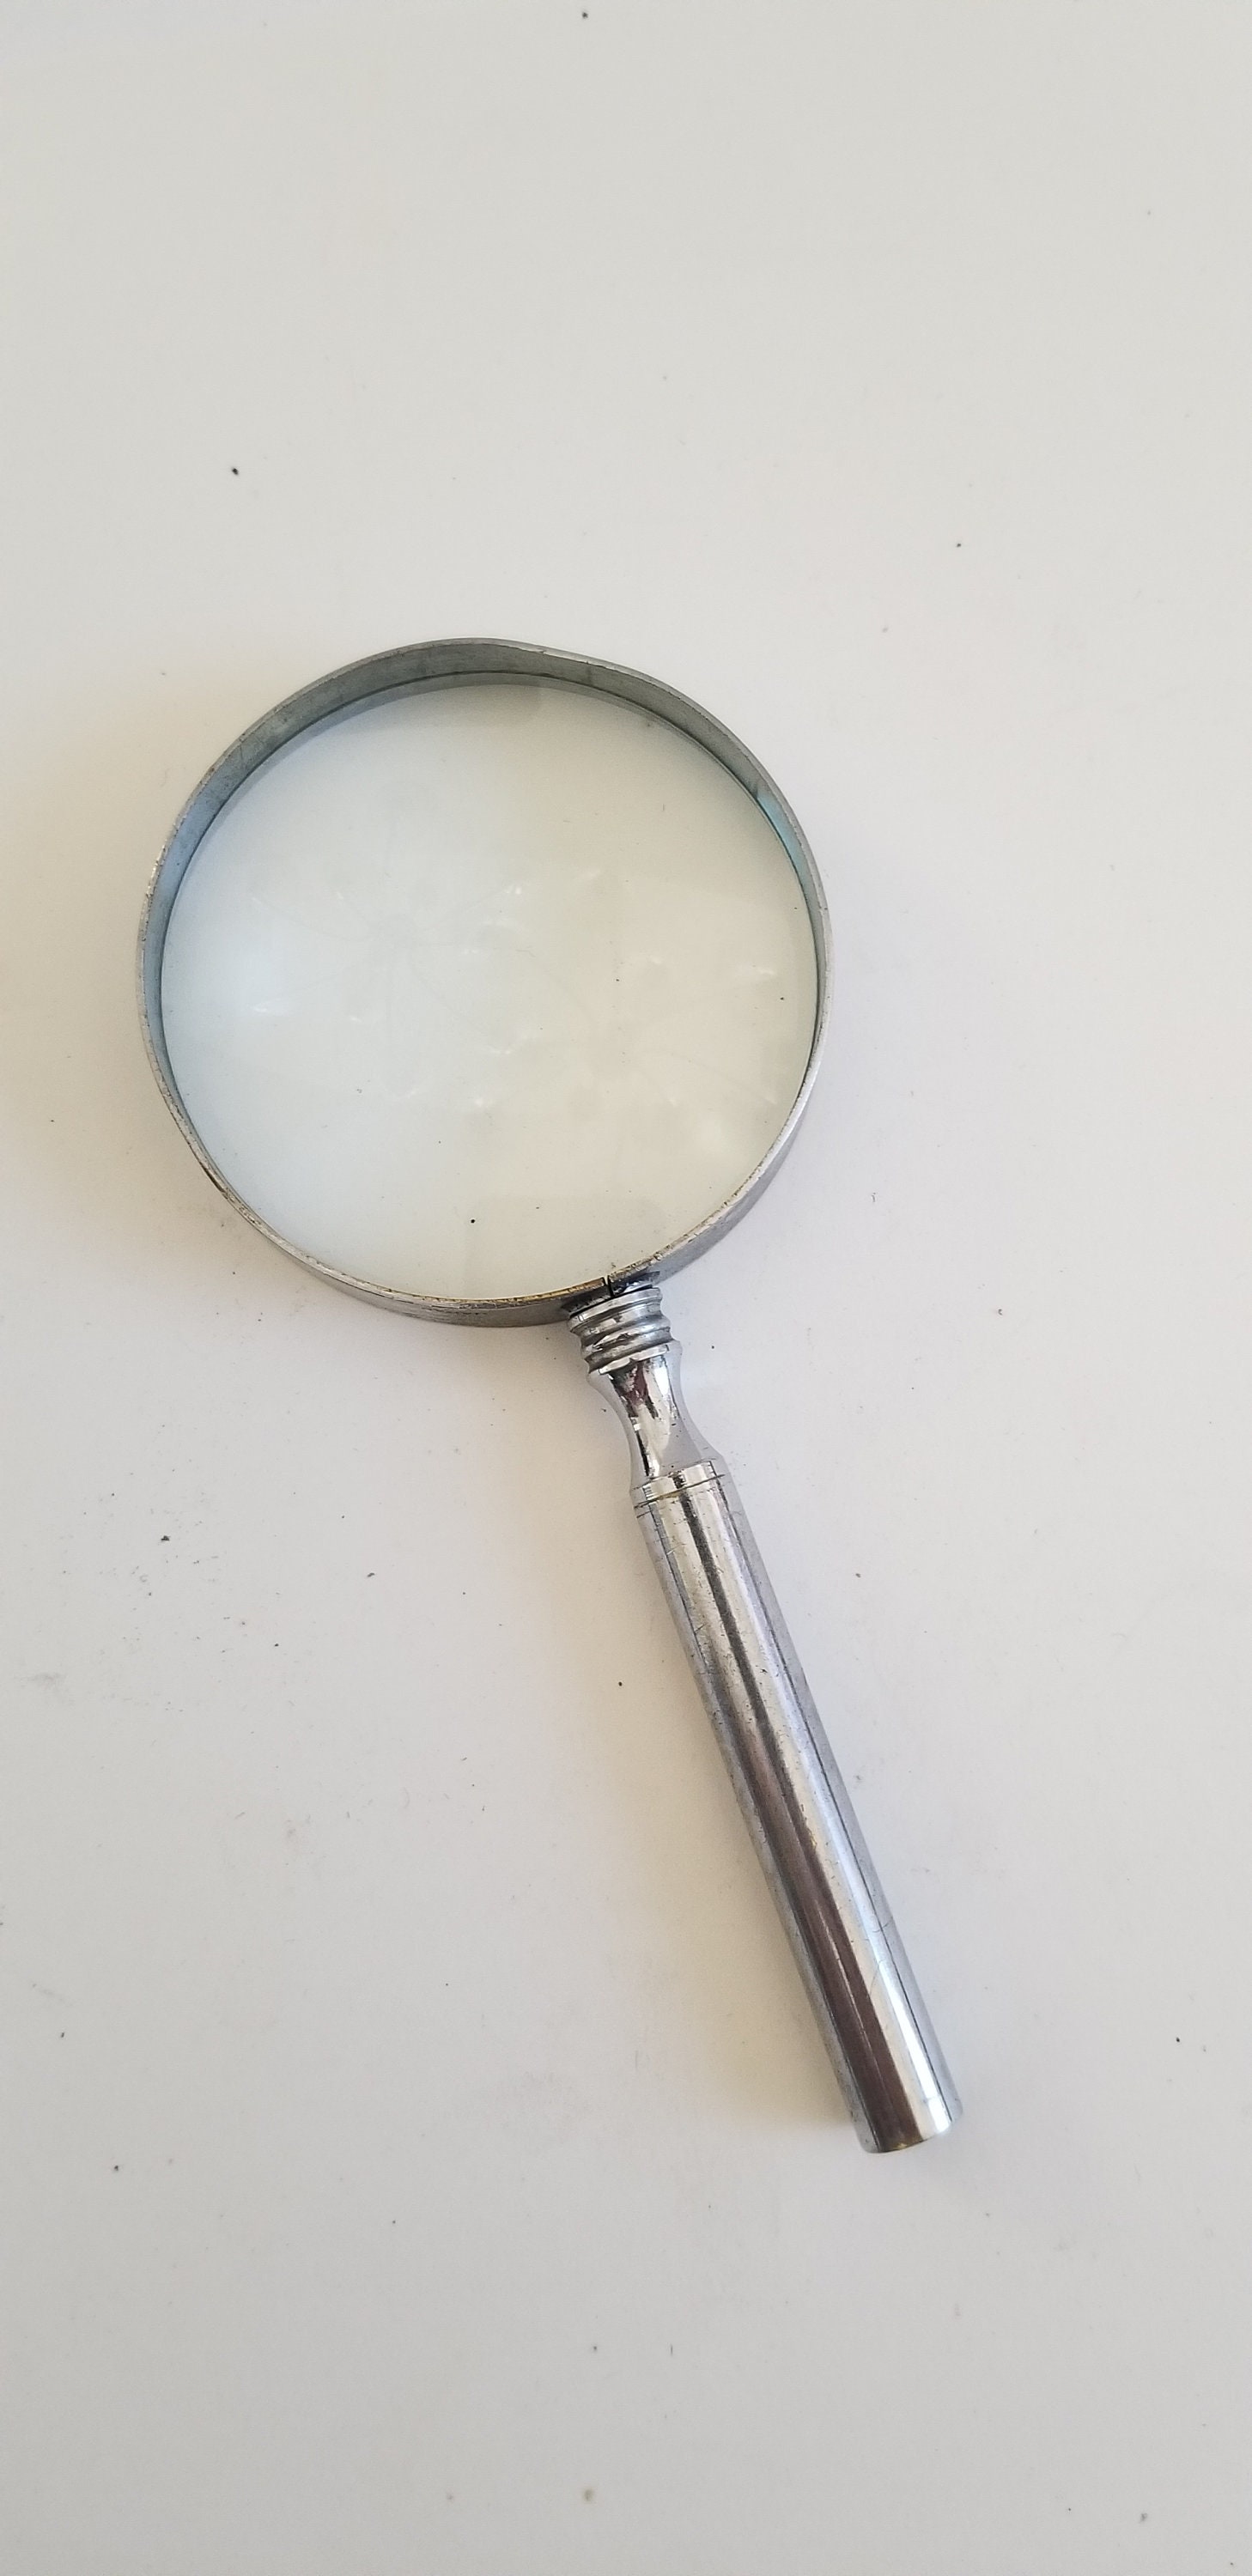 Vintage Small Size Magnifying Glass Without Pocket Clip, Probably Made by  Parker Chrome Frame Unmarked 1 13/16 Diameter 3 7/8 Long, 